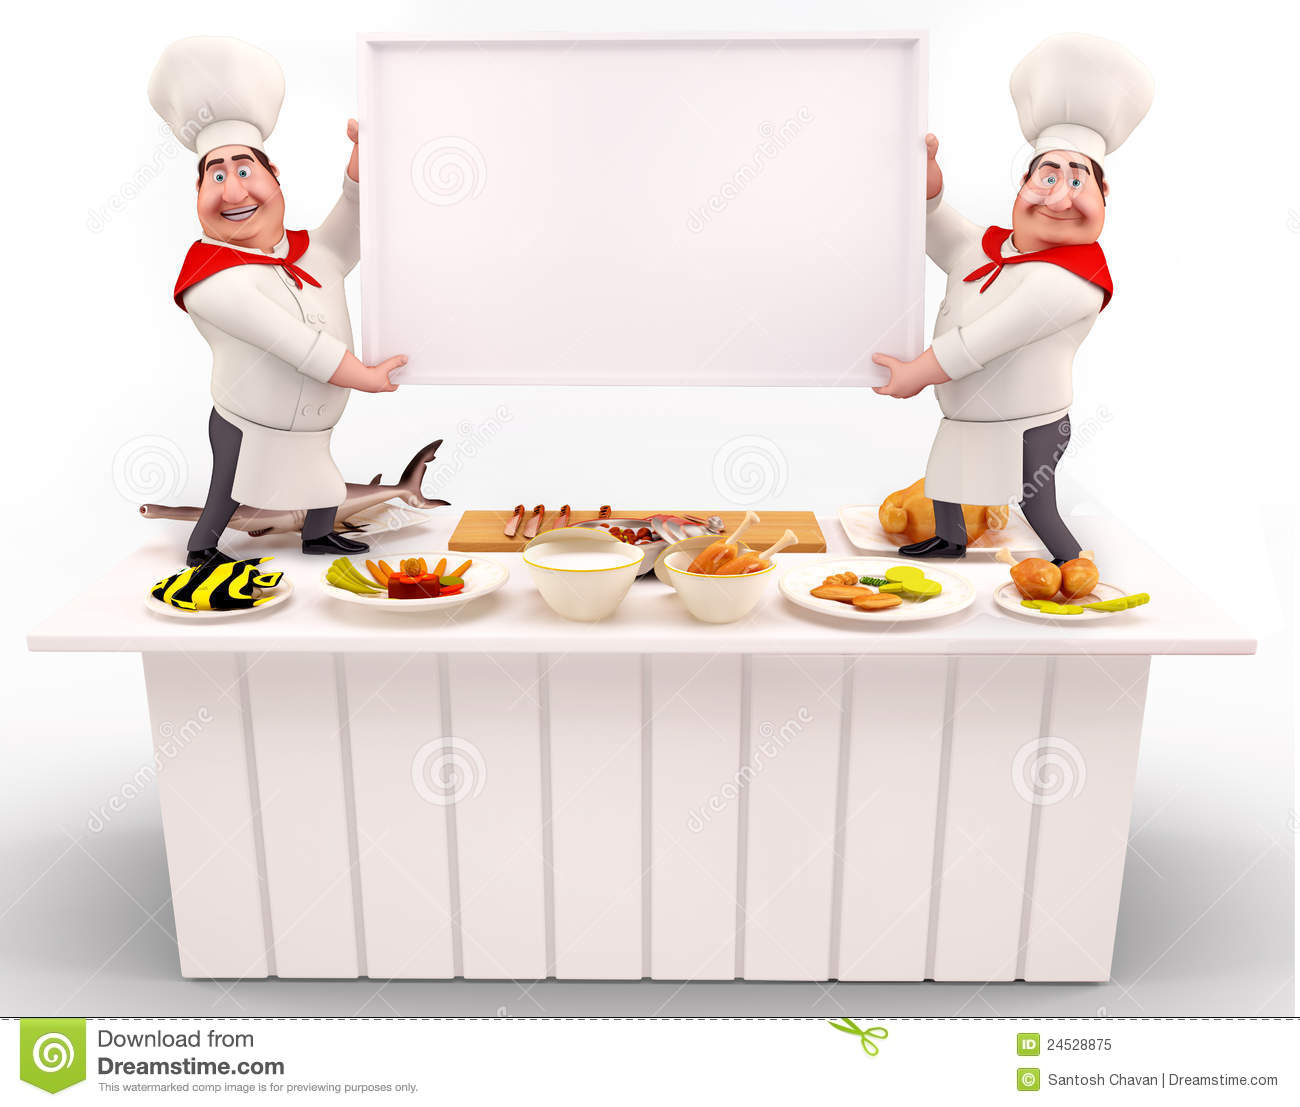 Stock Photo  Chef Holding White Sign On The Table  Image  24528875